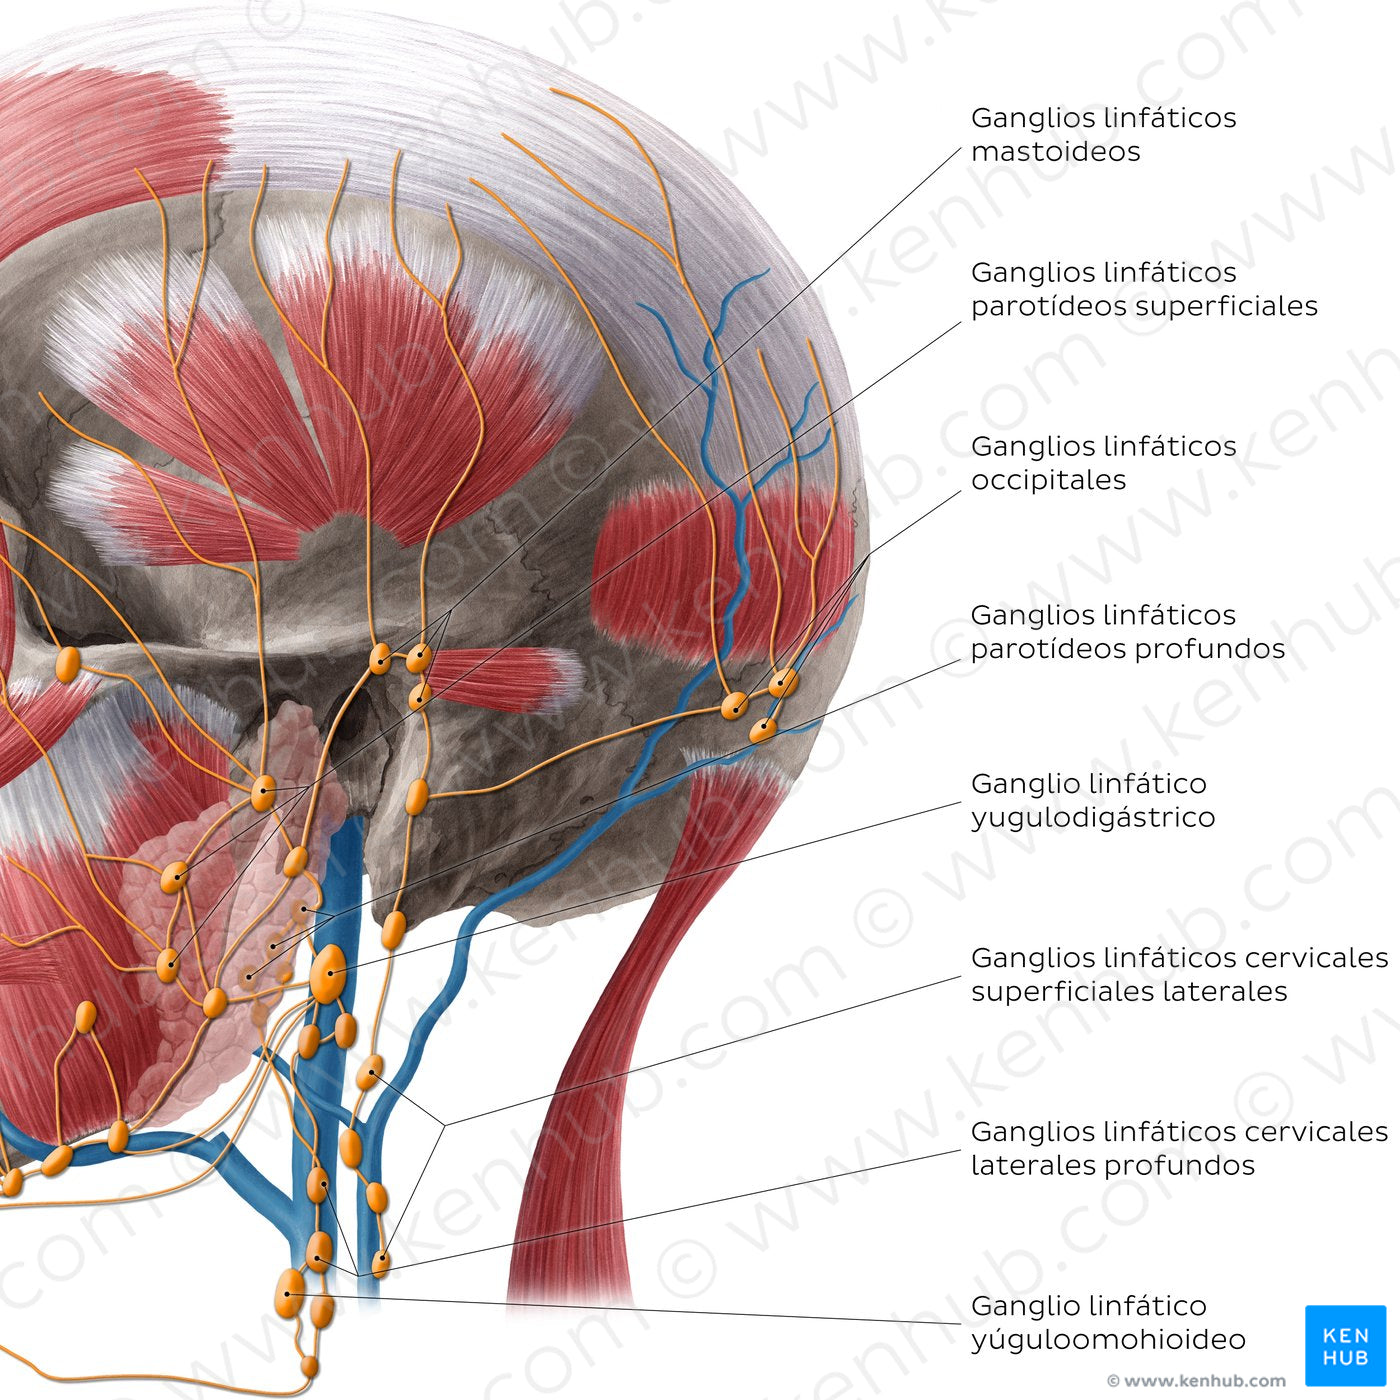 Lymphatics of the neck (Lateral) (Spanish)